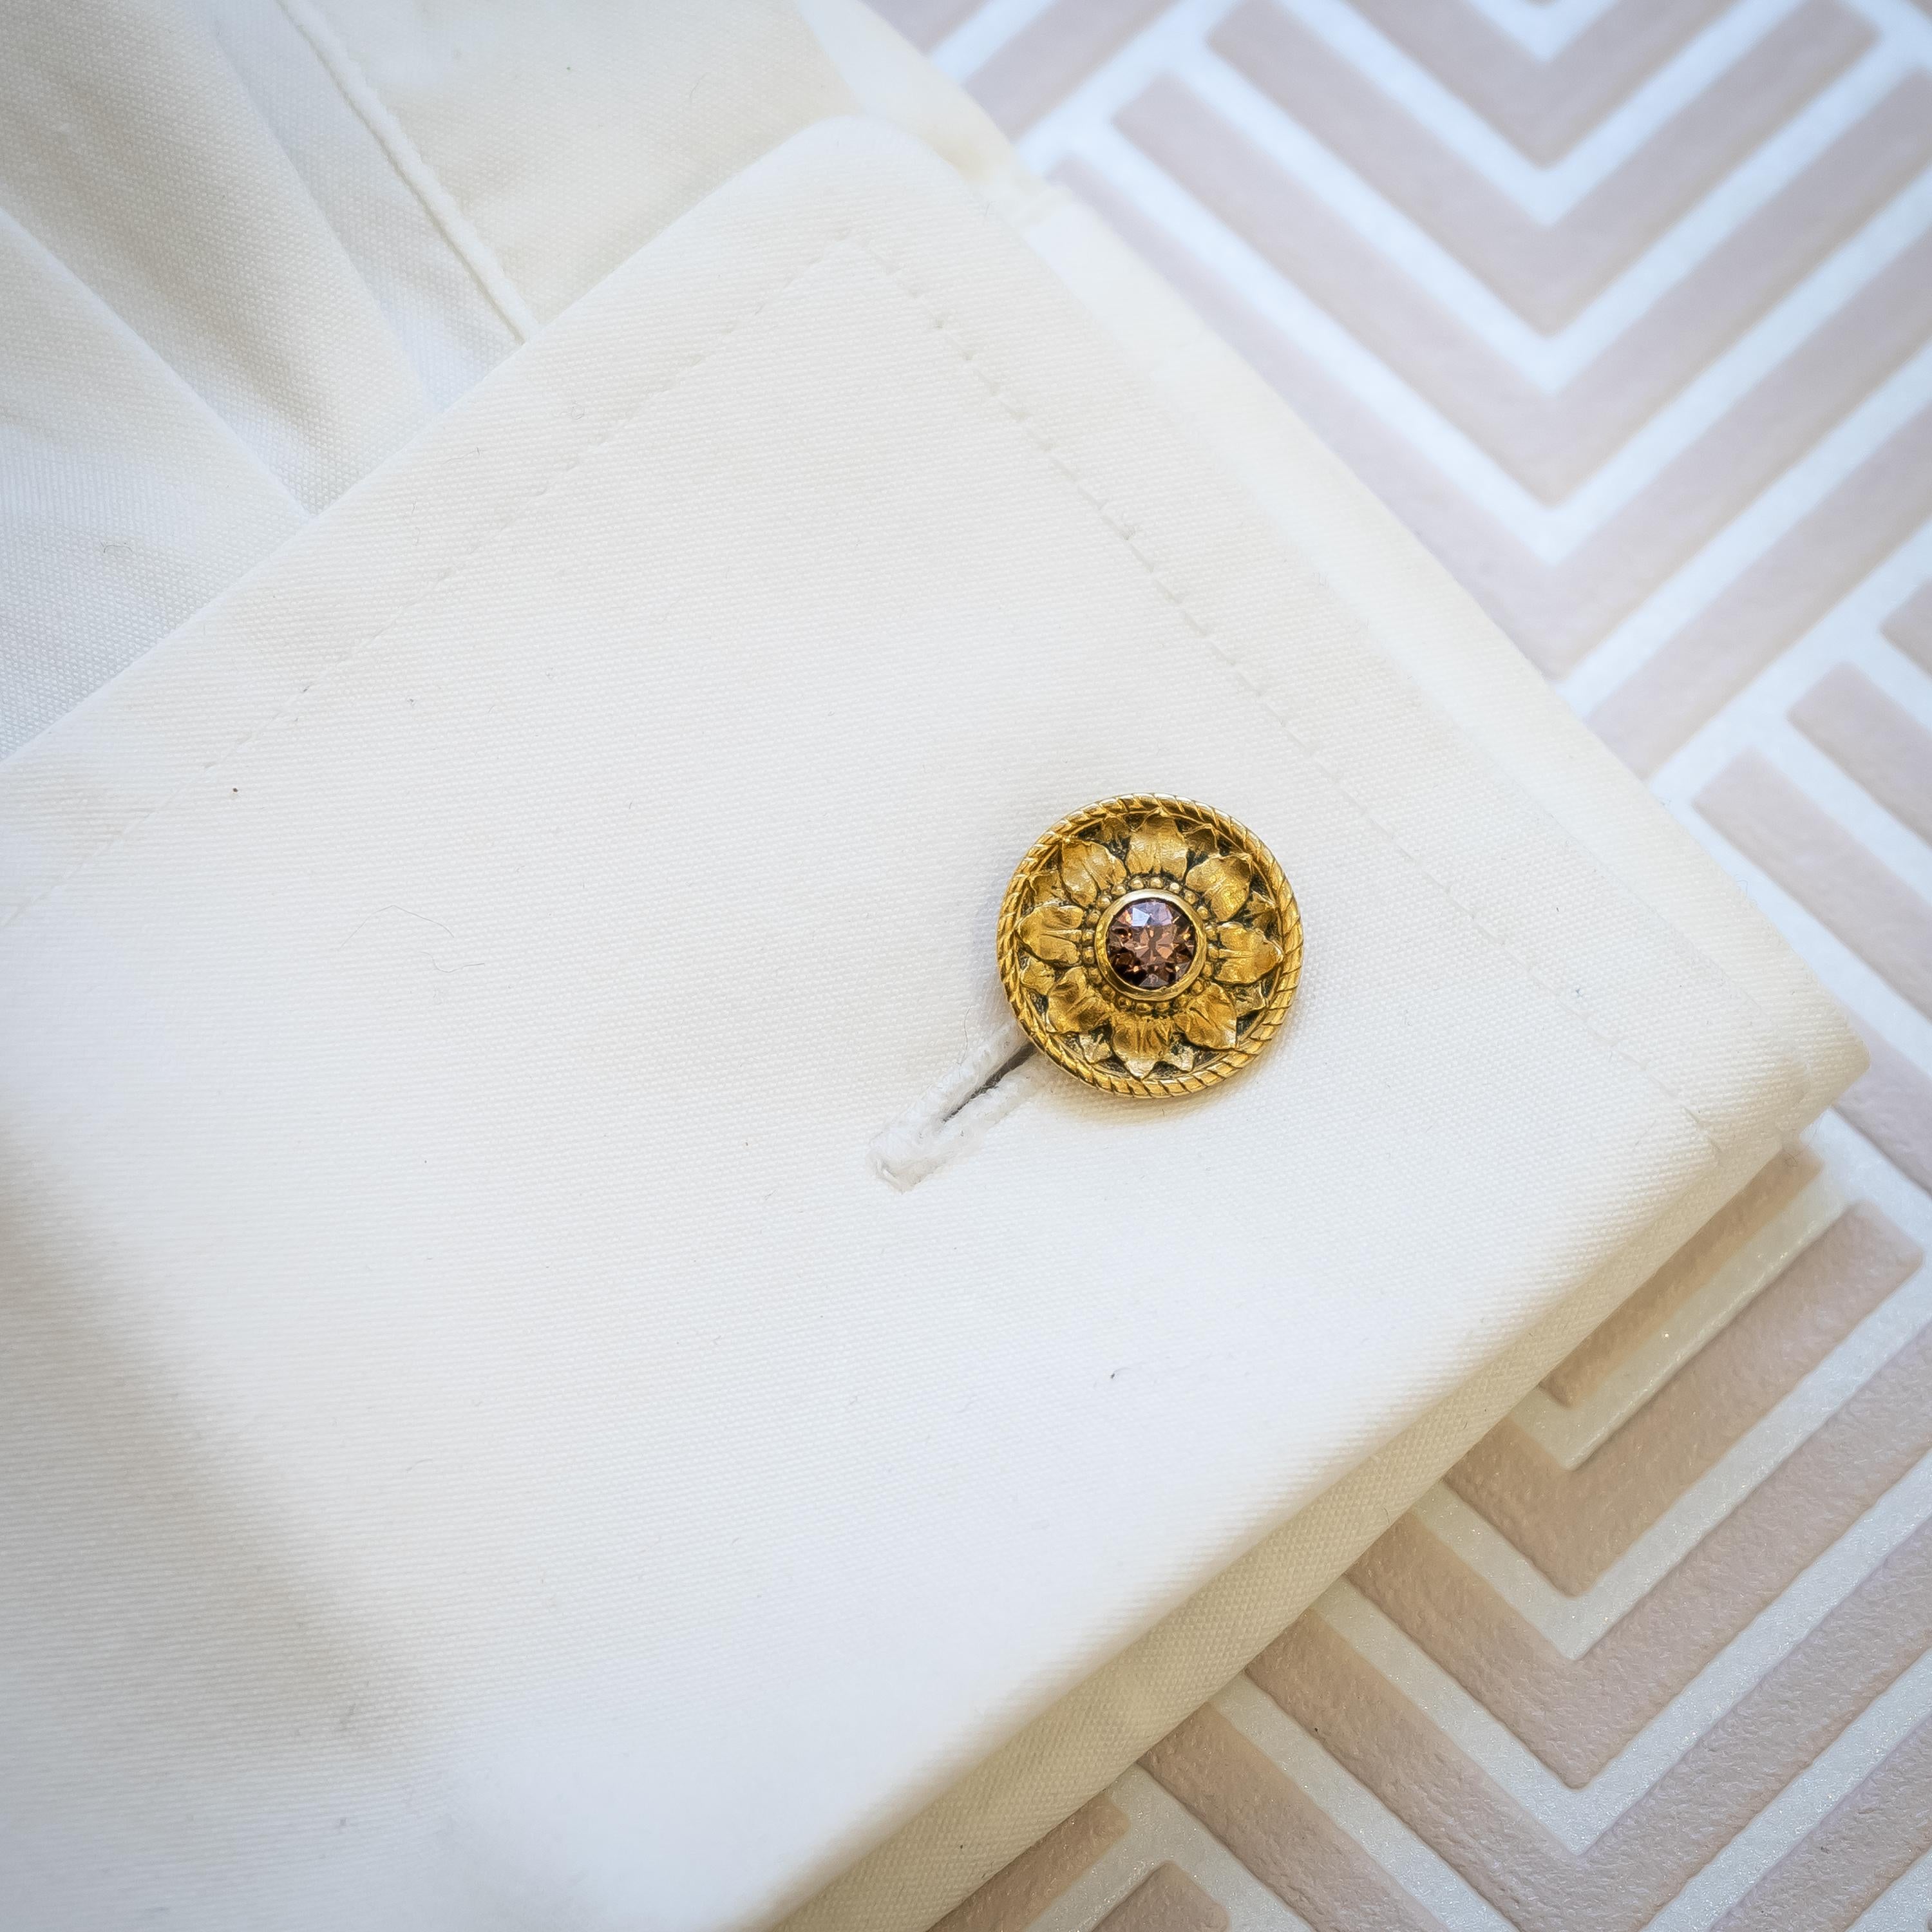 A pair of French, Art Nouveau, champagne brown diamond and yellow gold floral cufflinks, for Maison G. Desbazeille, with old-cut pink toned dark champagne brown diamonds, in rub over settings, in the centre of engraved sunflower like flowers, with a